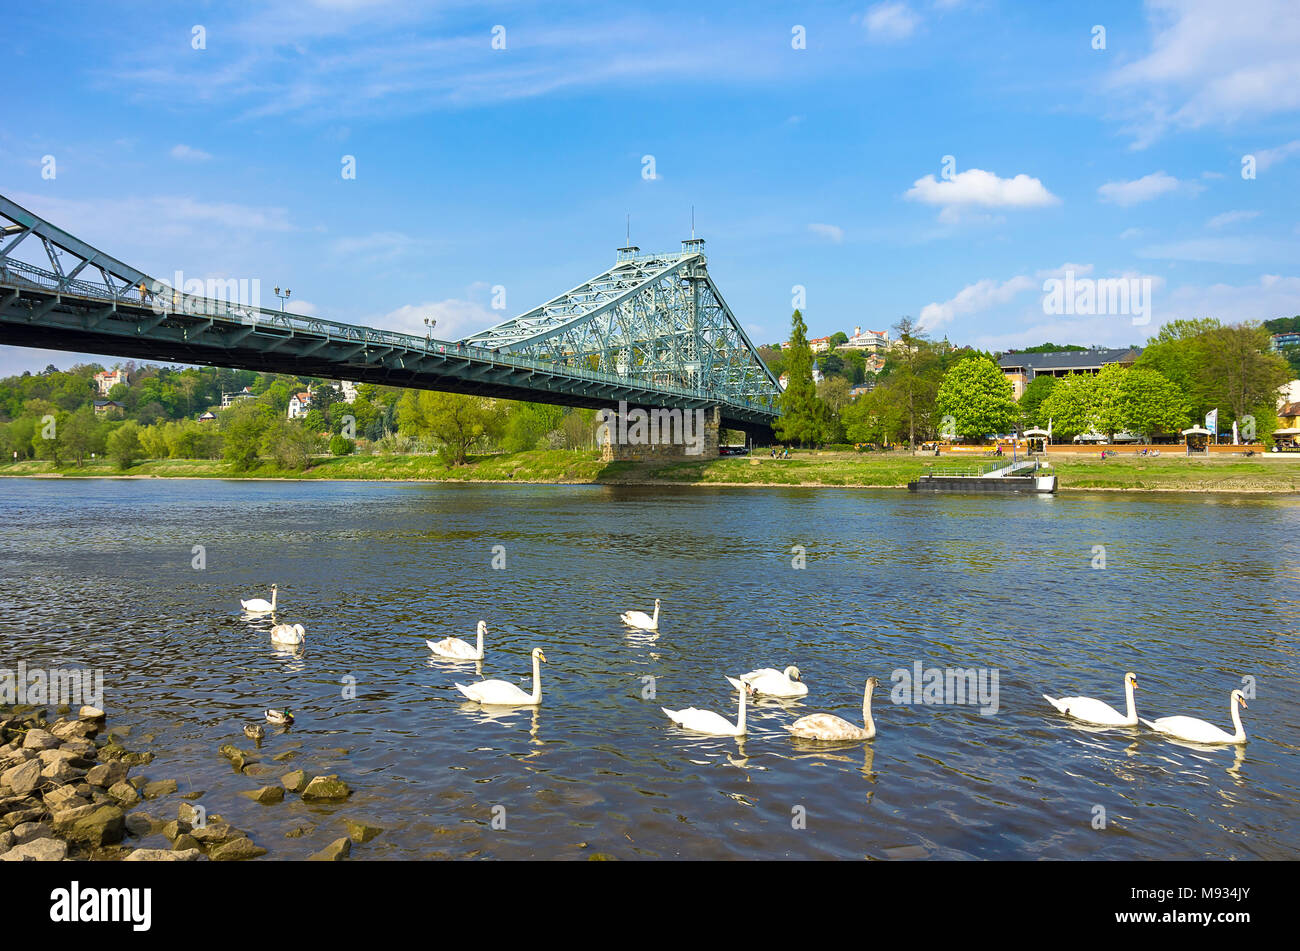 The Blue Wonder Bridge seen from the district of Blasewitz and with white swans that frolic on the Elbe River, Dresden, Saxony, Germany. Stock Photo